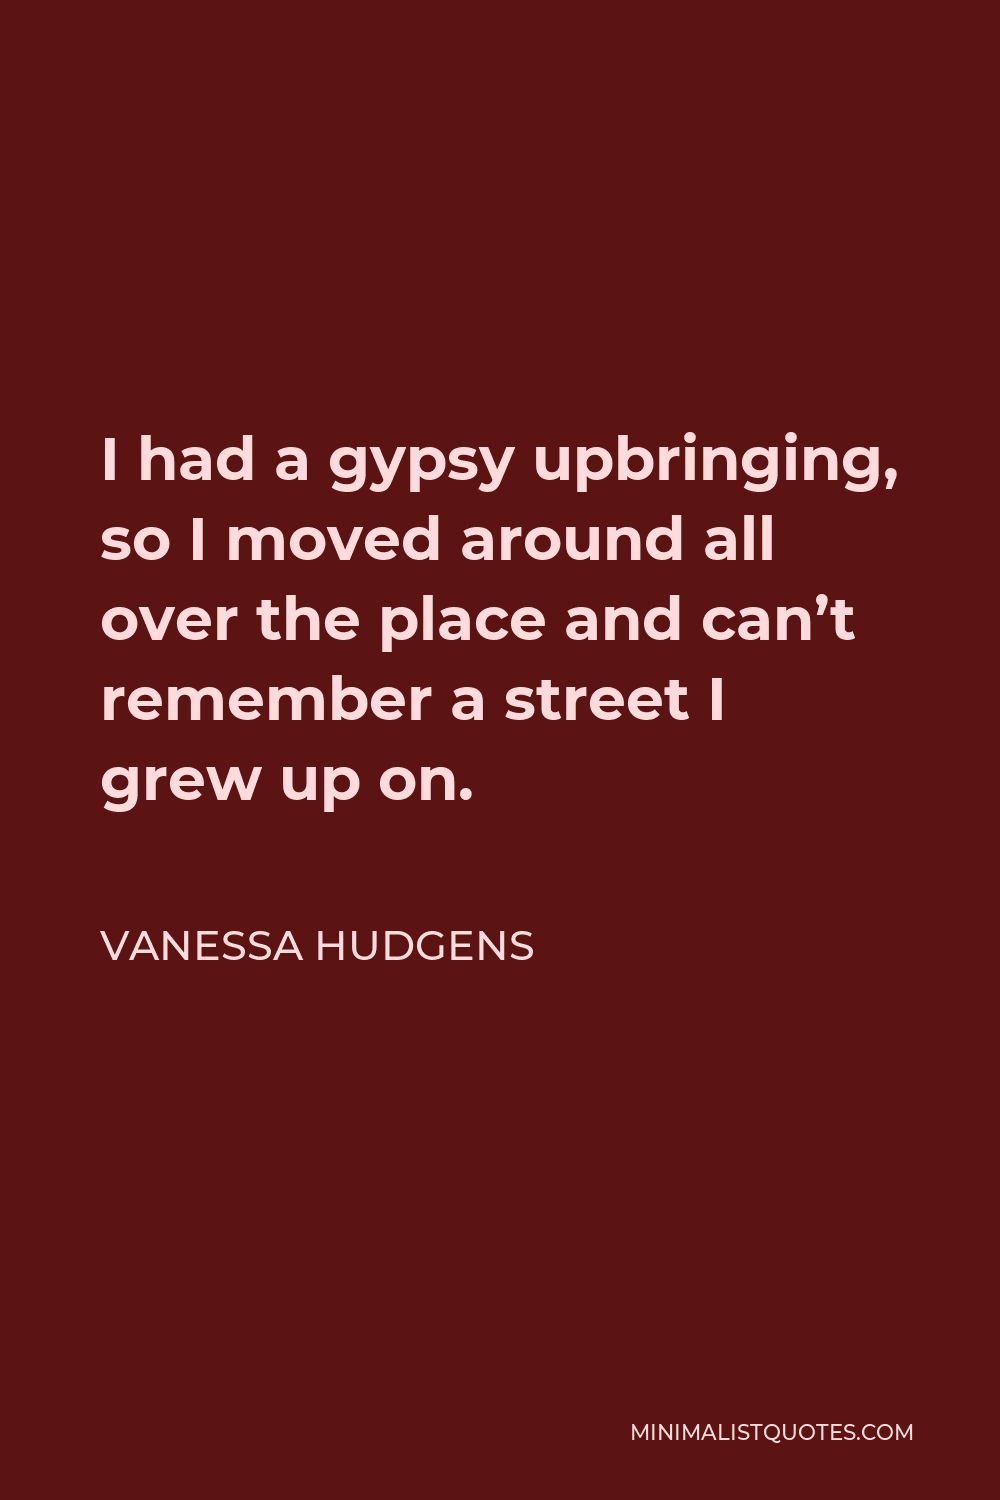 Vanessa Hudgens Quote - I had a gypsy upbringing, so I moved around all over the place and can’t remember a street I grew up on.